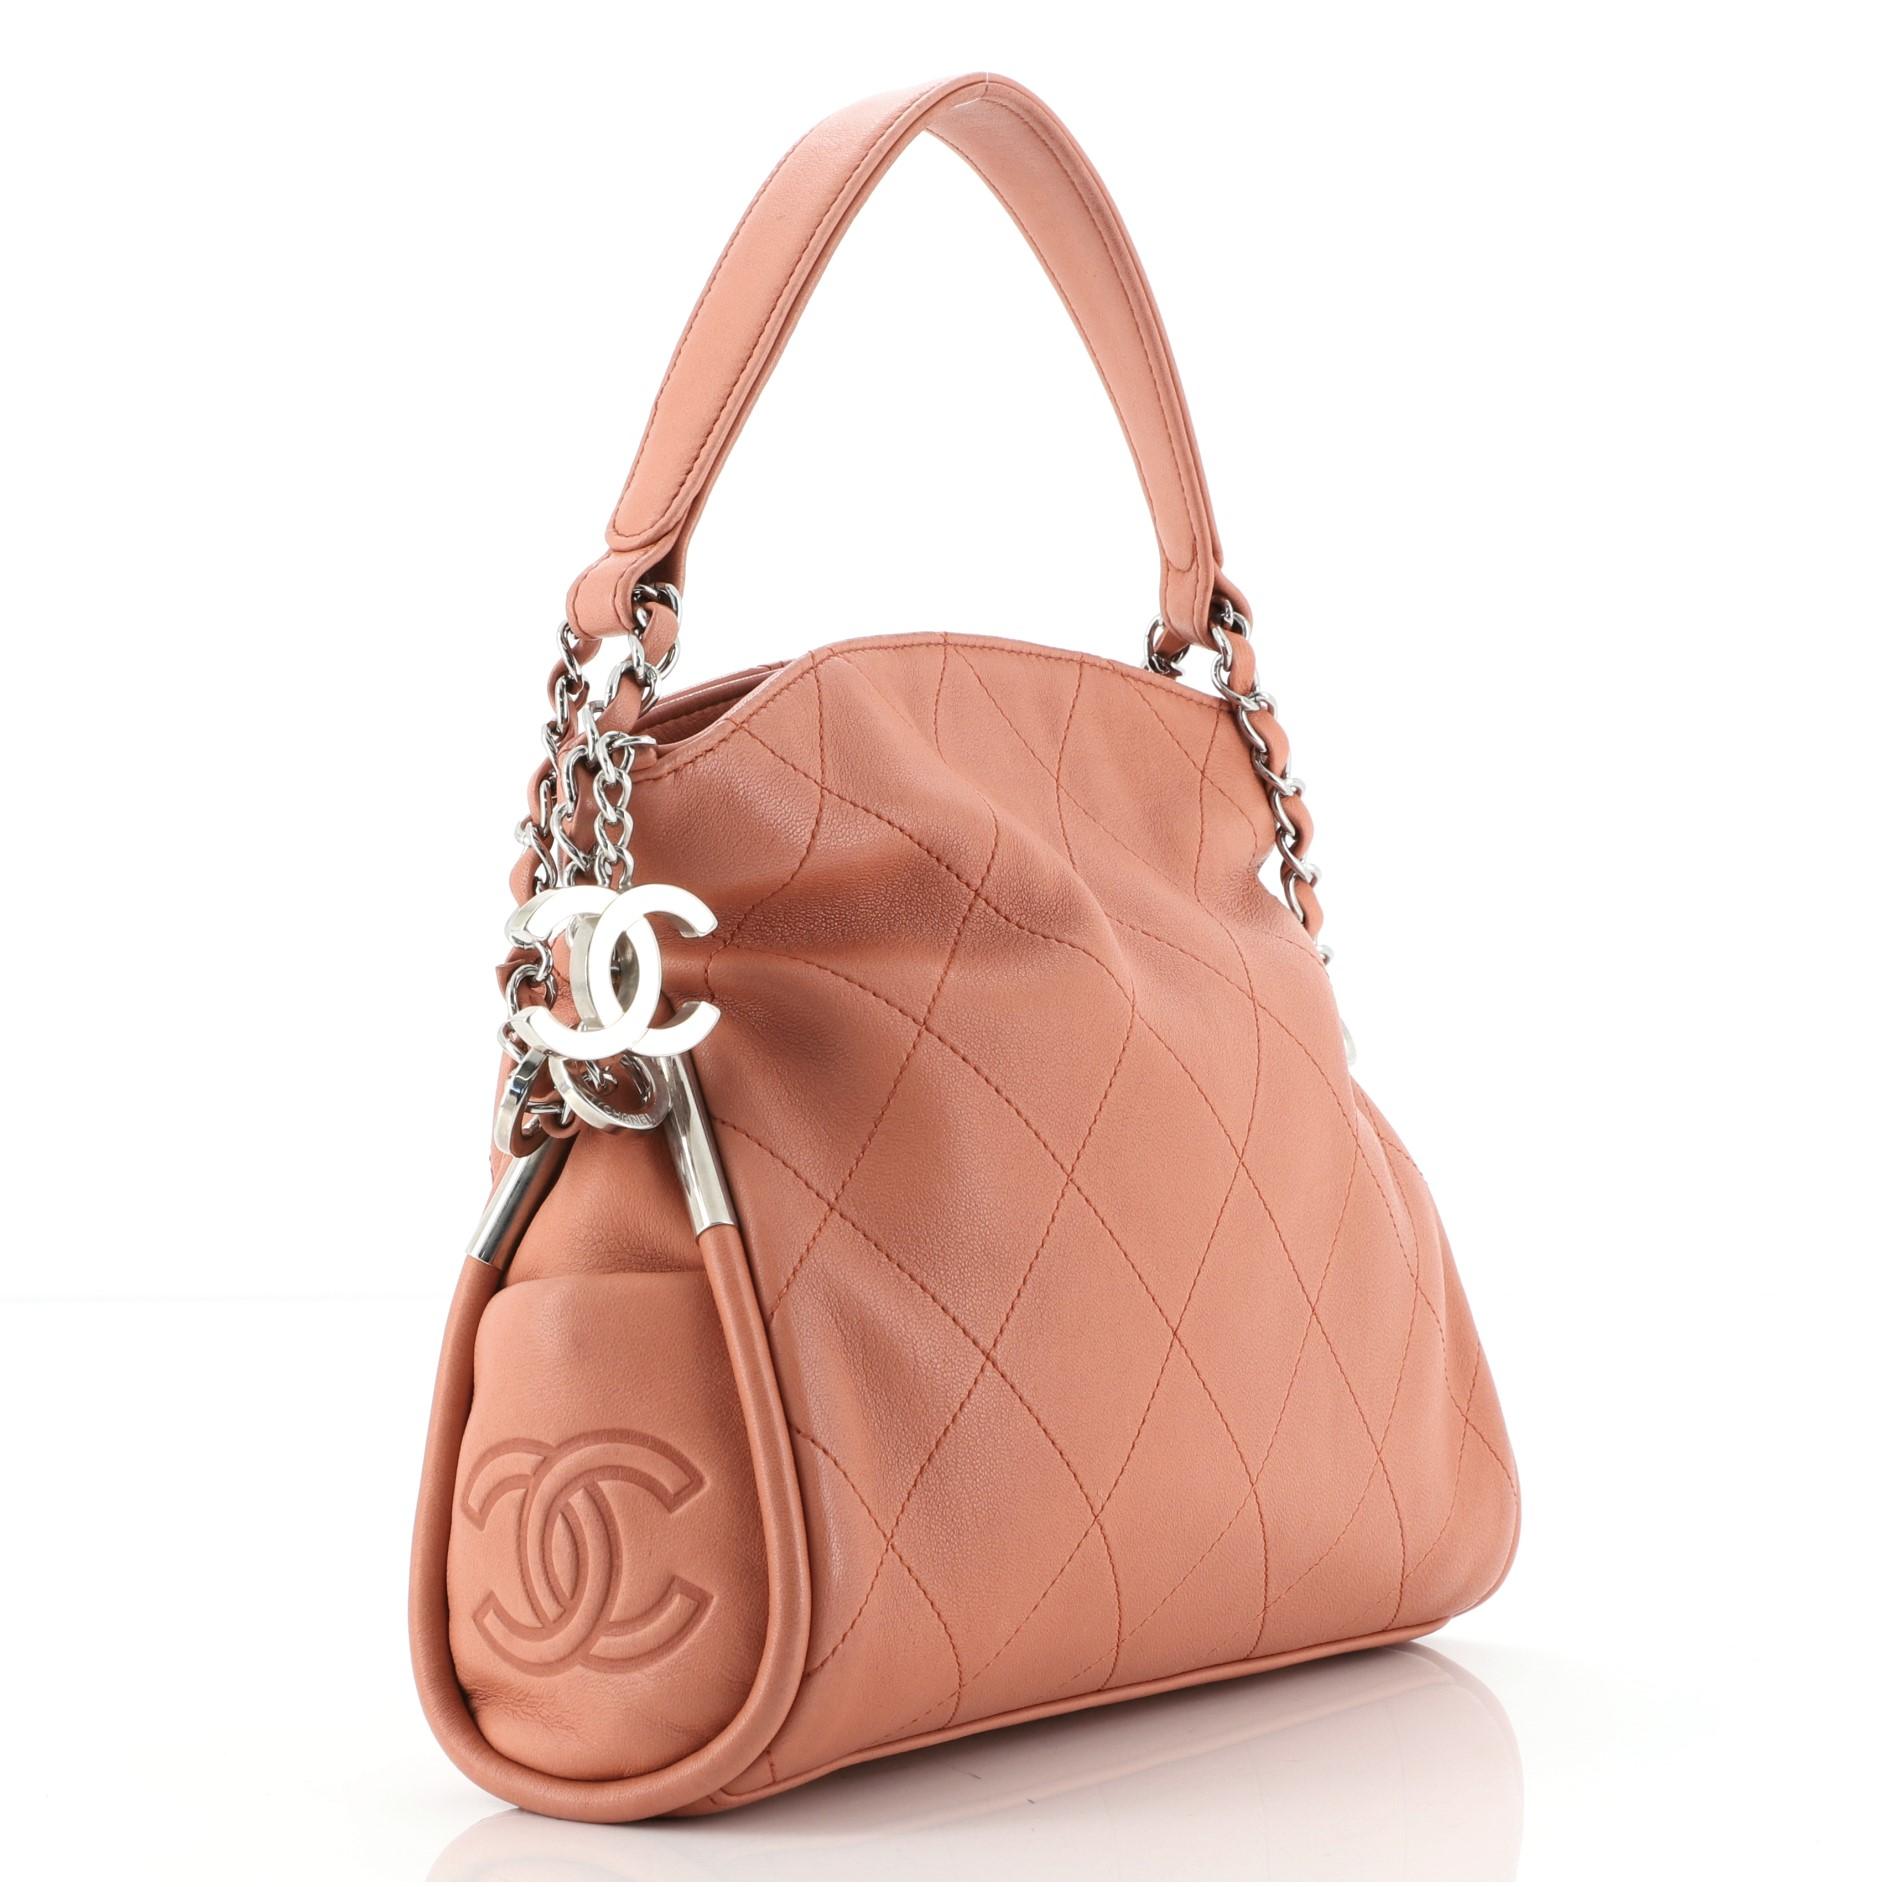 Chanel Pink Quilted Leather Ultimate Small Soft Hobo Bag features silver-tone hardware, single chain-link and leather shoulder strap with shoulder guard, dual slip pockets with embossed CC accent at sides, tonal logo jacquard lining, single zip